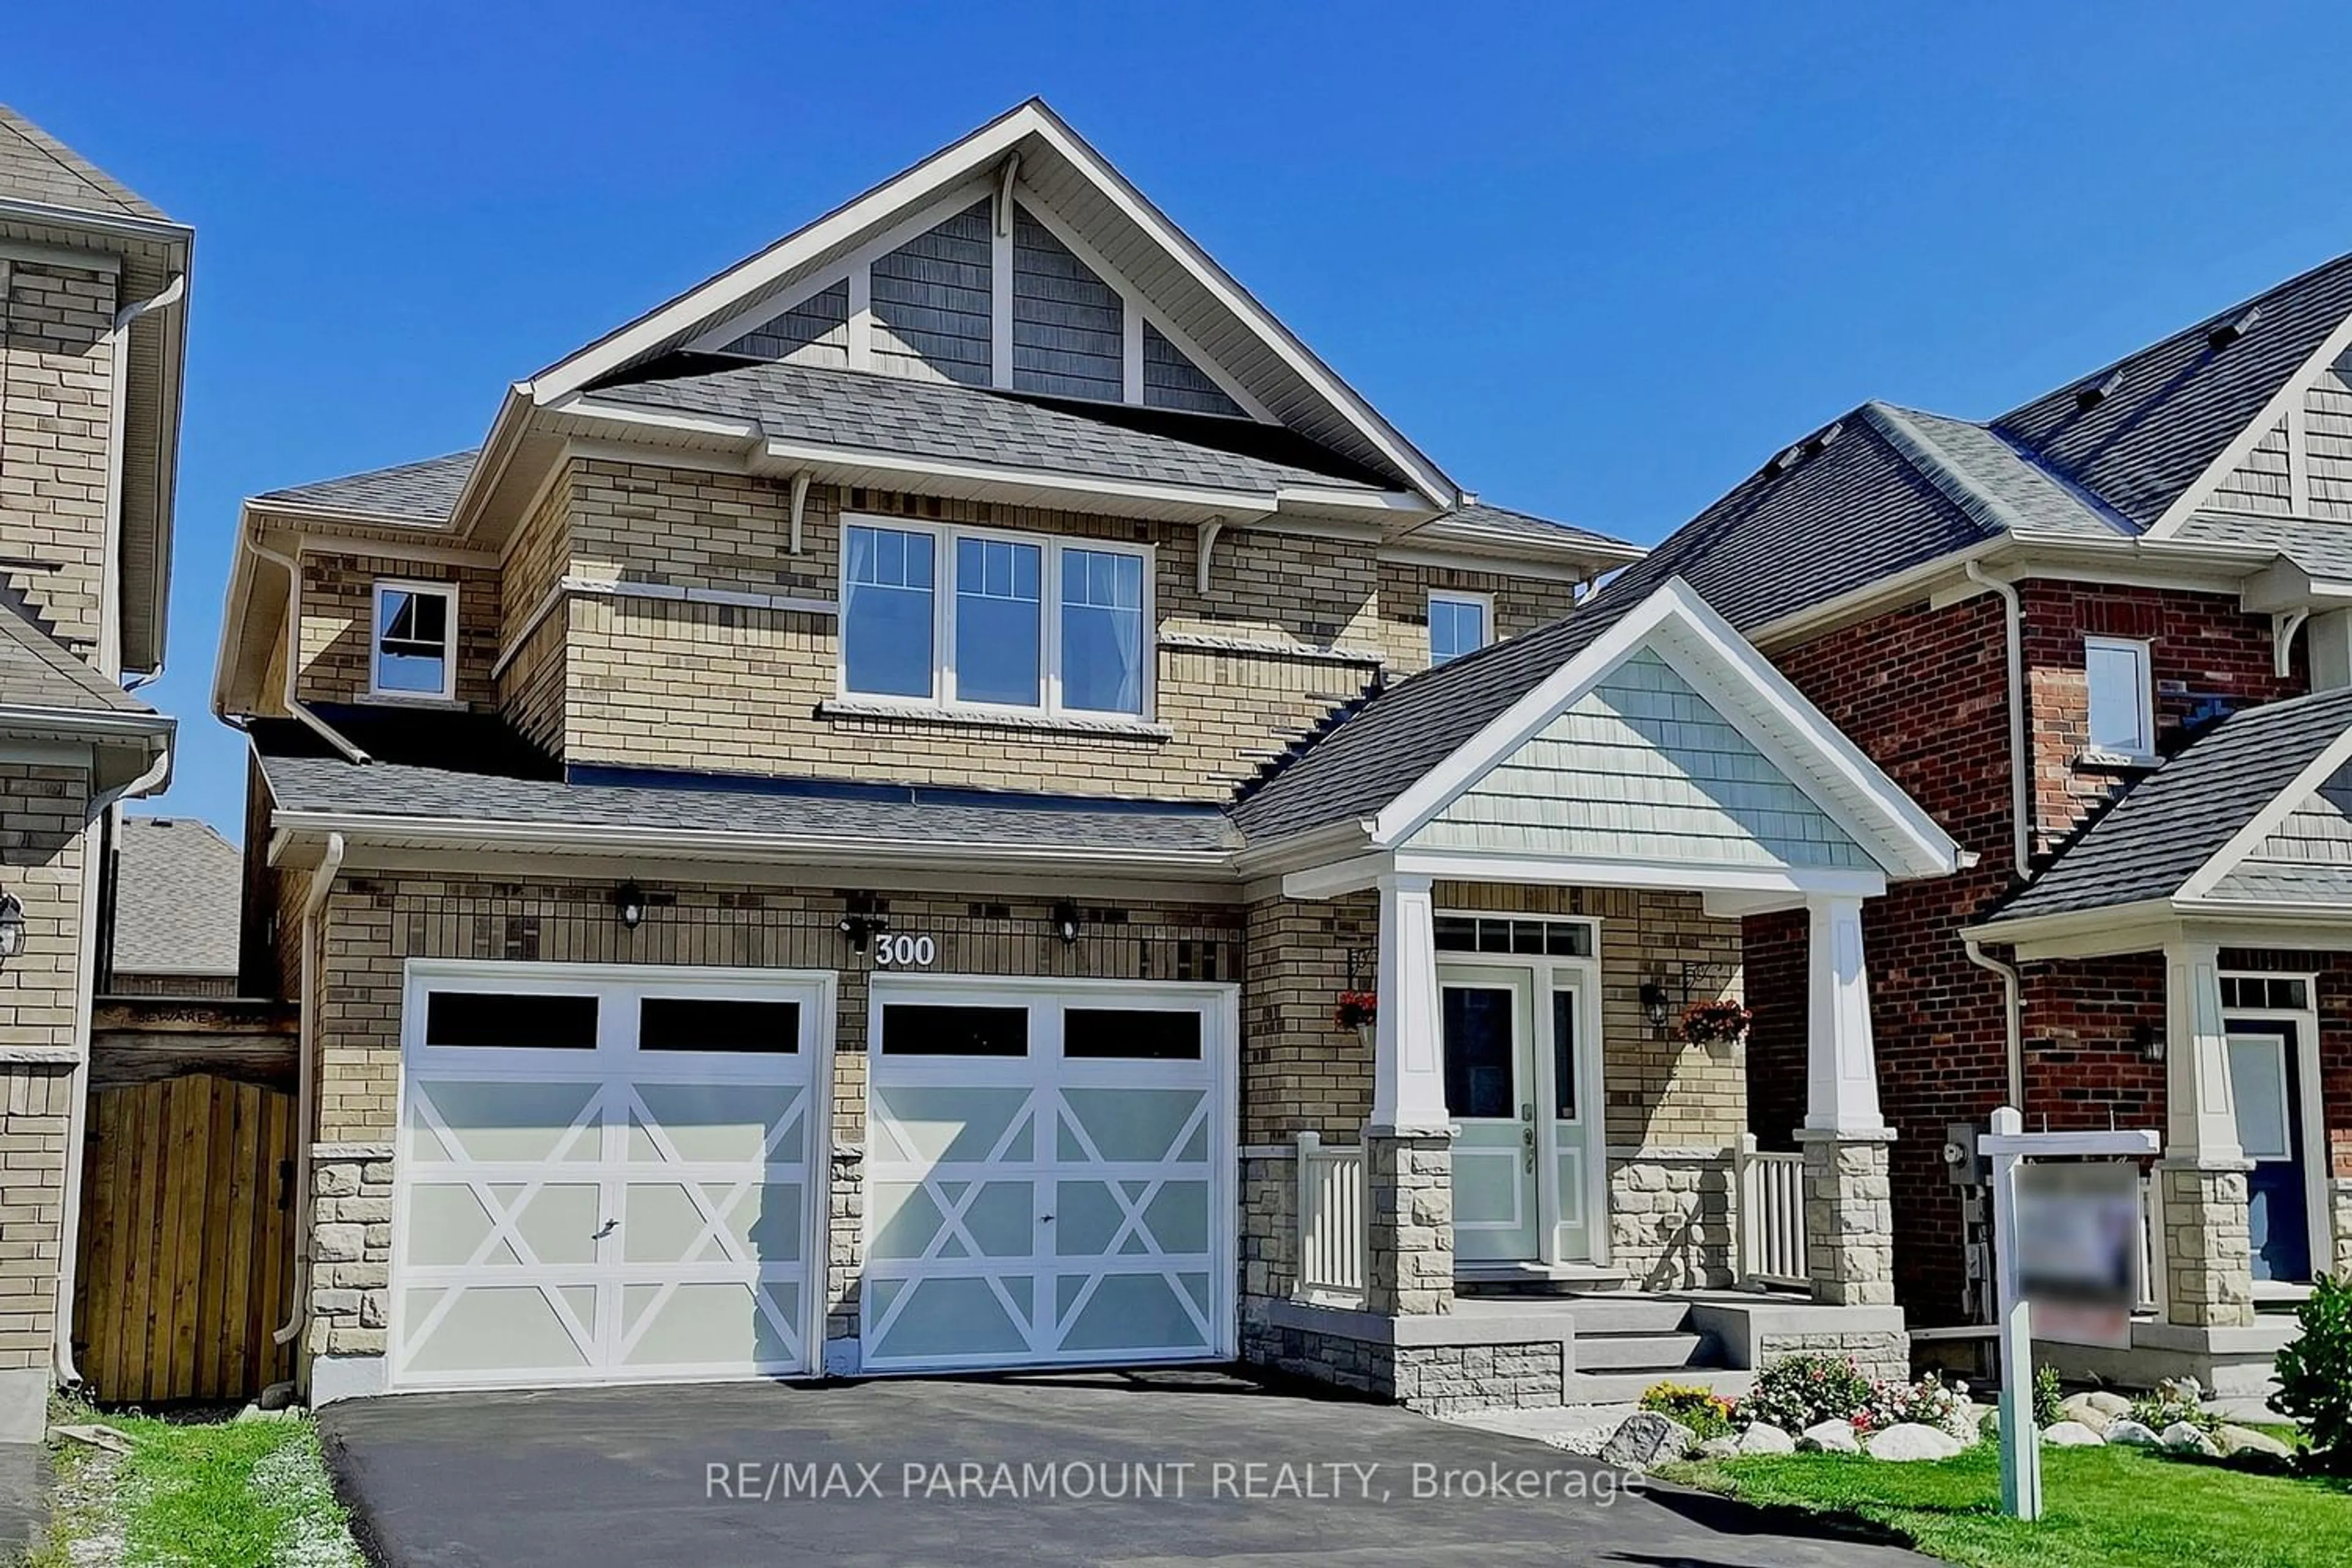 Home with brick exterior material for 300 Pimlico Dr, Oshawa Ontario L1H 7K4